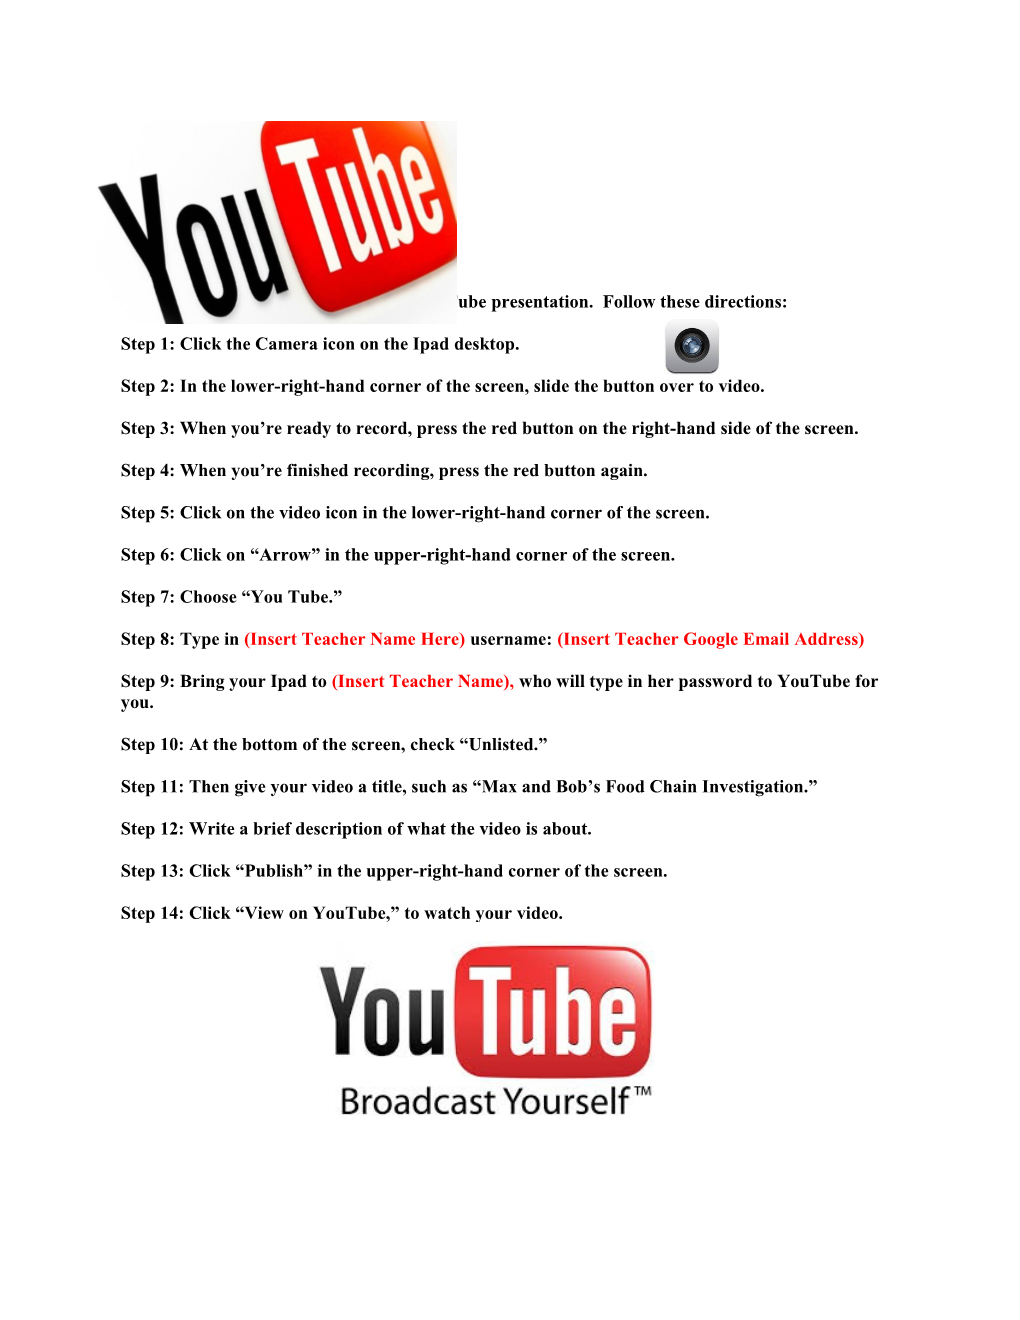 Get Ready to Record and Upload Your Youtube Presentation. Follow These Directions